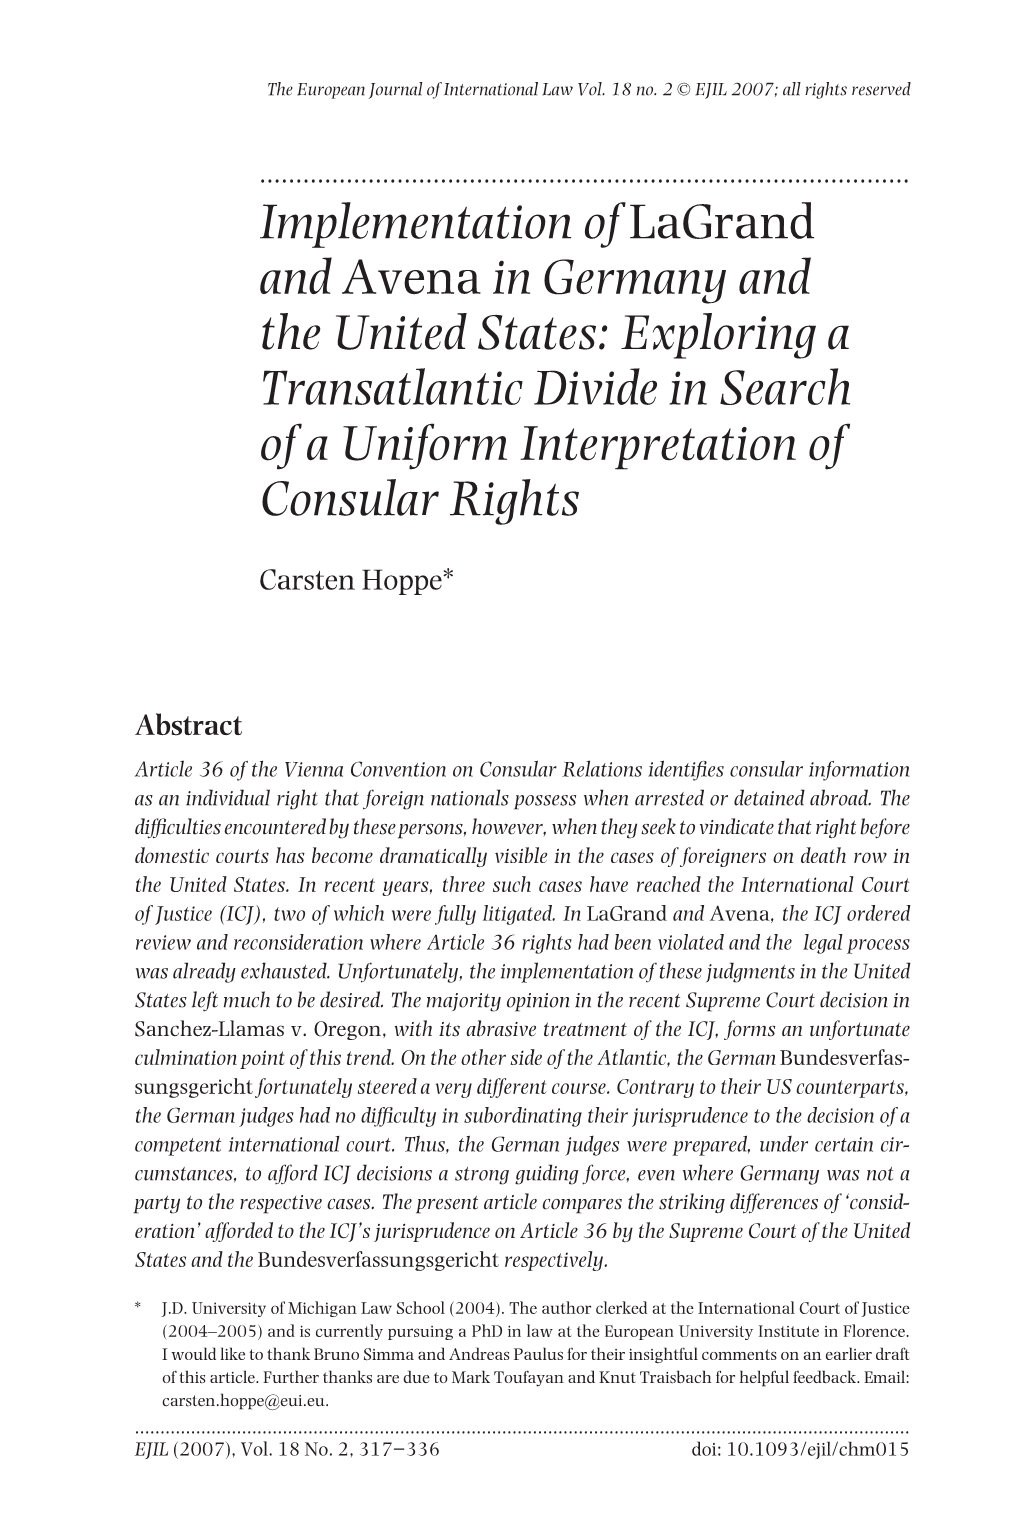 Implementation of Lagrand and Avena in Germany and the United States: Exploring a Transatlantic Divide in Search of a Uniform Interpretation of Consular Rights